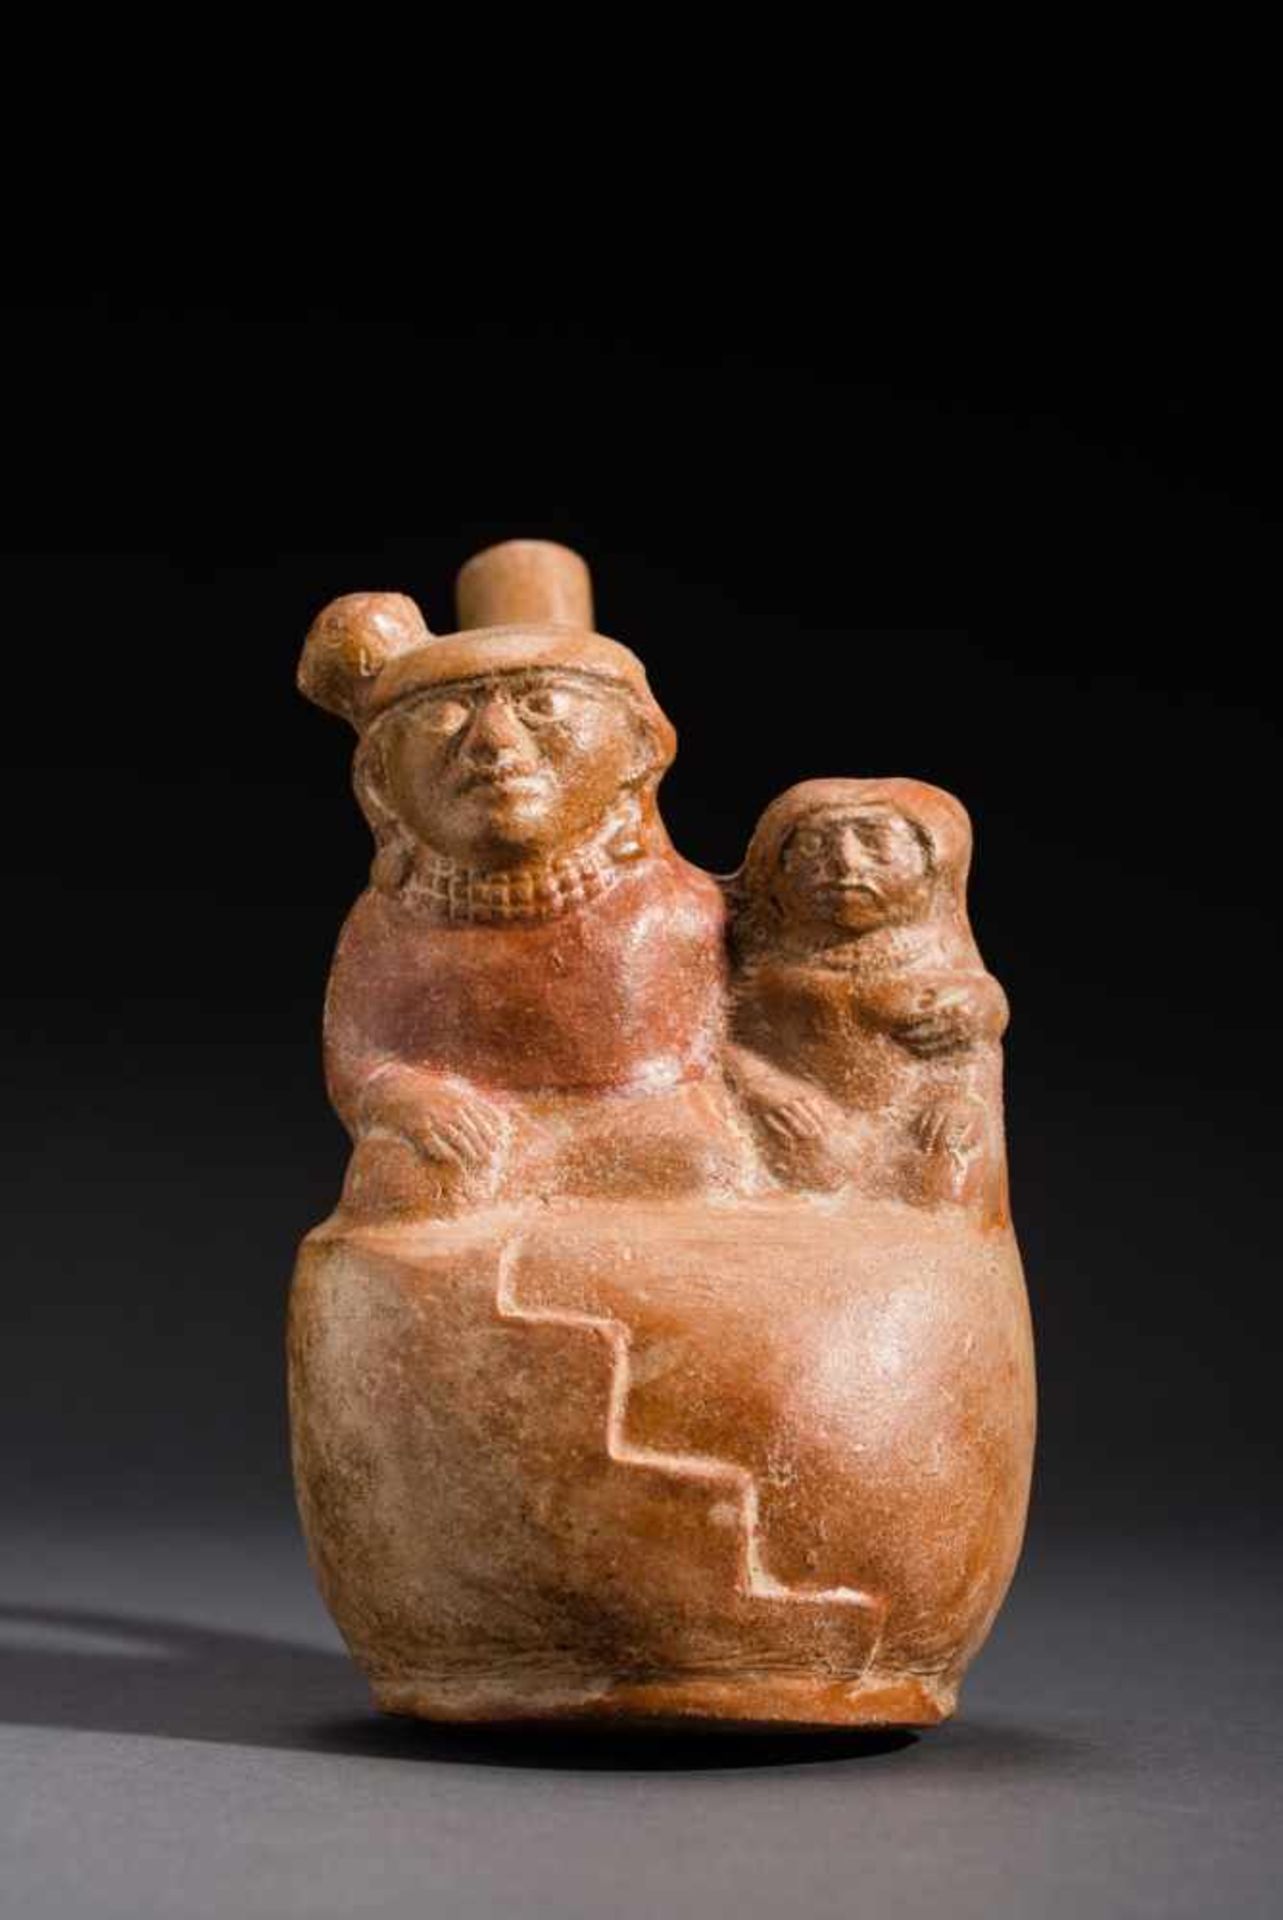 VESSEL WITH MAN AND WOMAN Terracotta. Moche, ca. 8th cent. (TL-tested) Small woman and large man